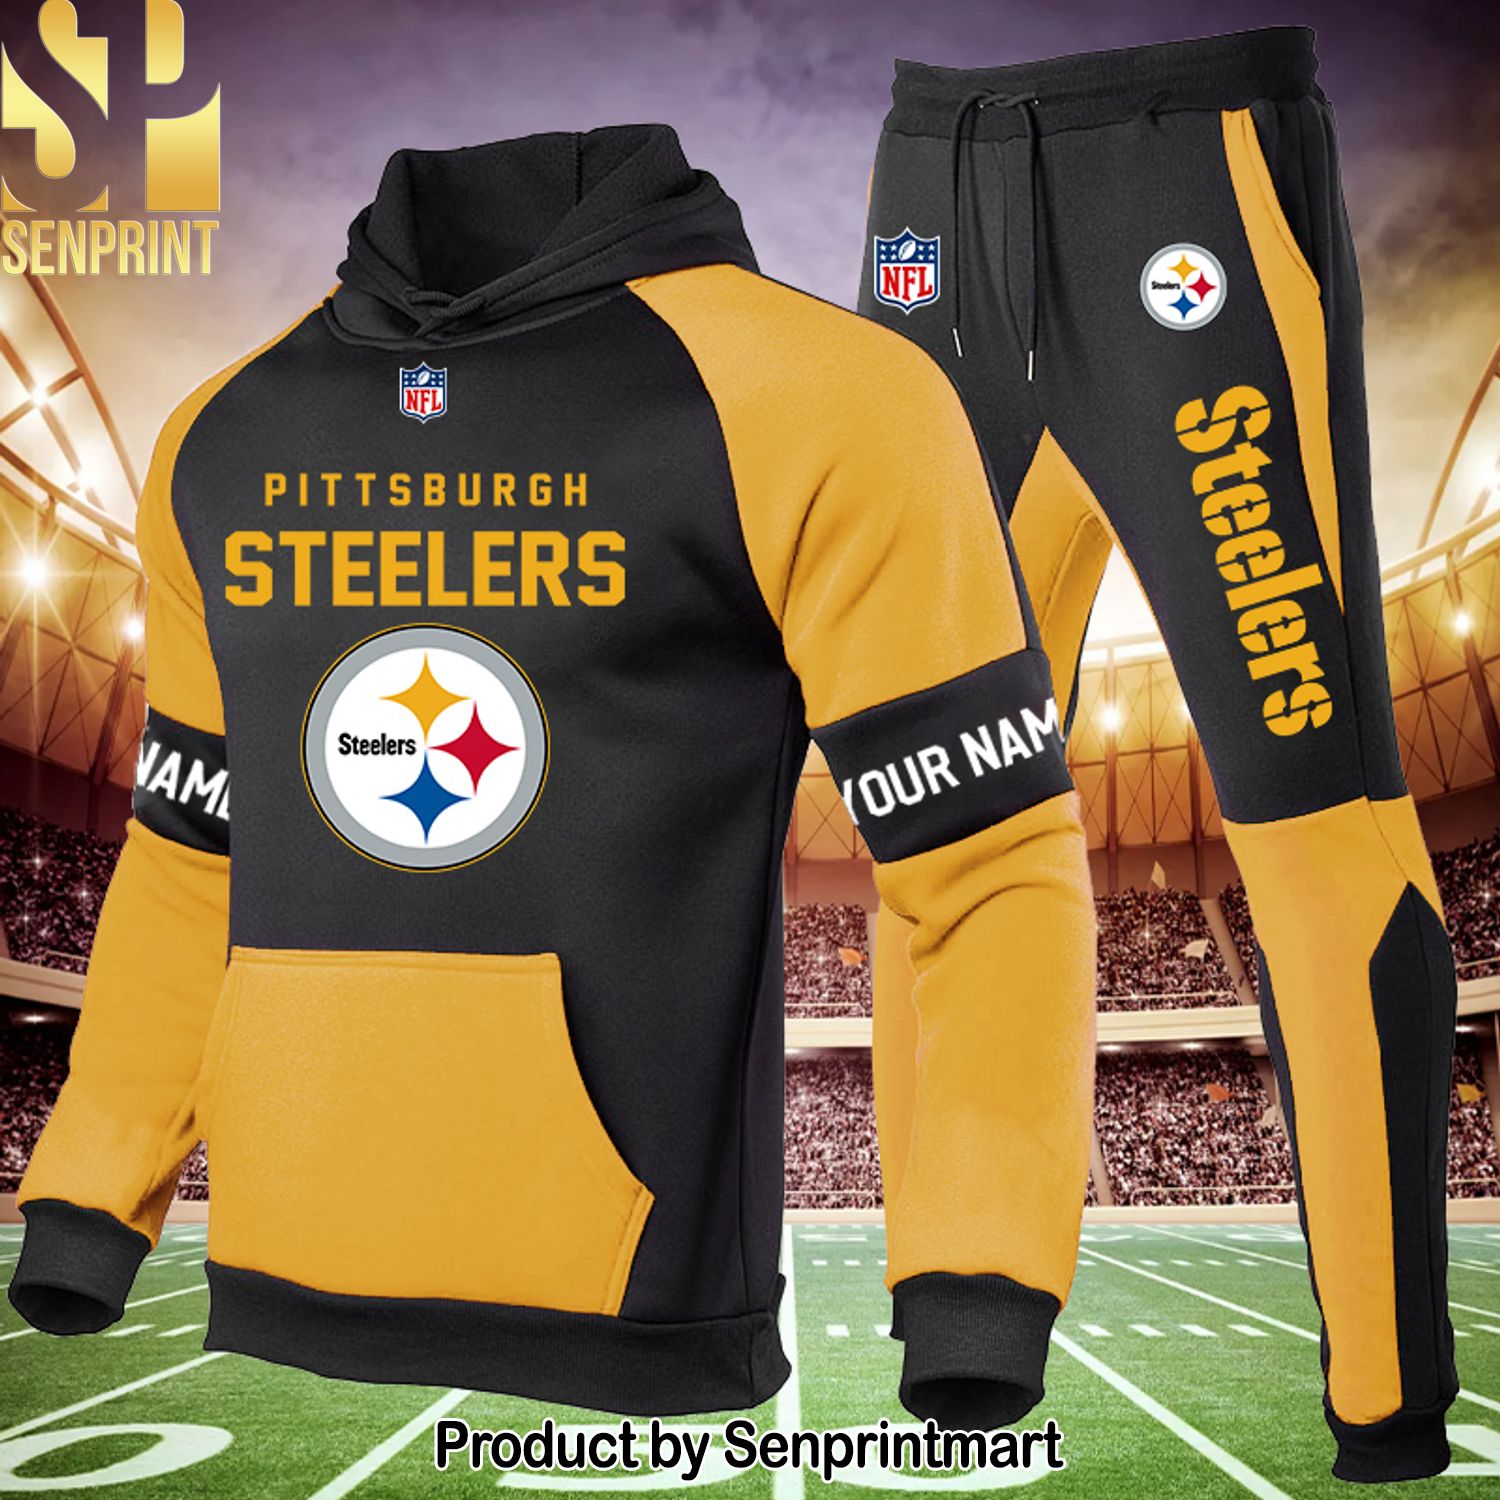 Pittsburgh Steelers 3D Full Printed Shirt and Pants